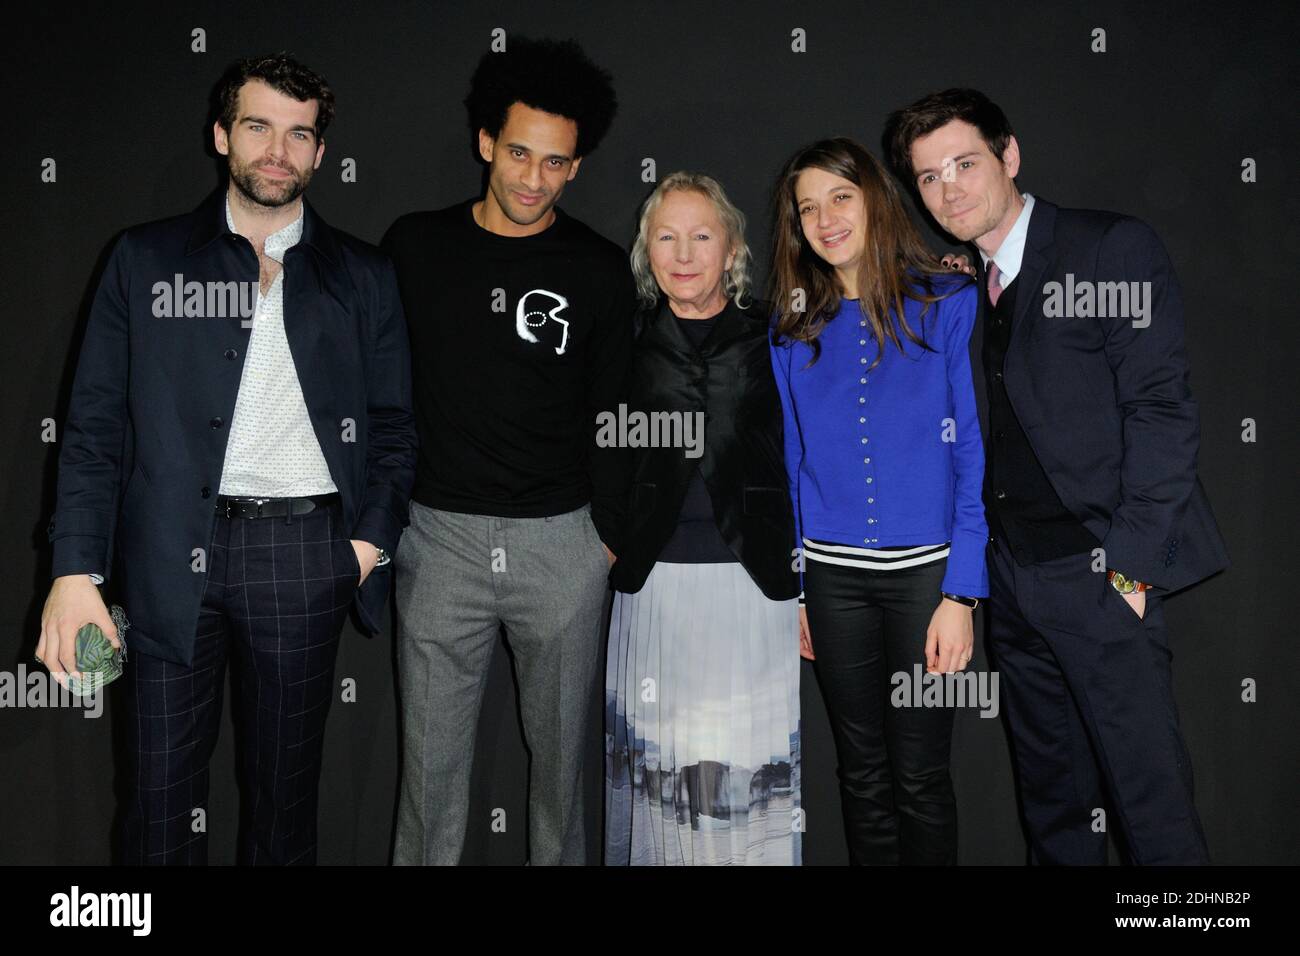 Agnes Trouble, better known as Agnes B, flanked by Stanley Weber, David Saada, Georgia Scalliet and Loic Corbery attend the Agnes B Menswear Spring-Summer 2016 show as part of Paris Fashion Week on January 24, 2016 in Paris, France. Photo by Alban Wyters/ABACAPRESS.COM Stock Photo